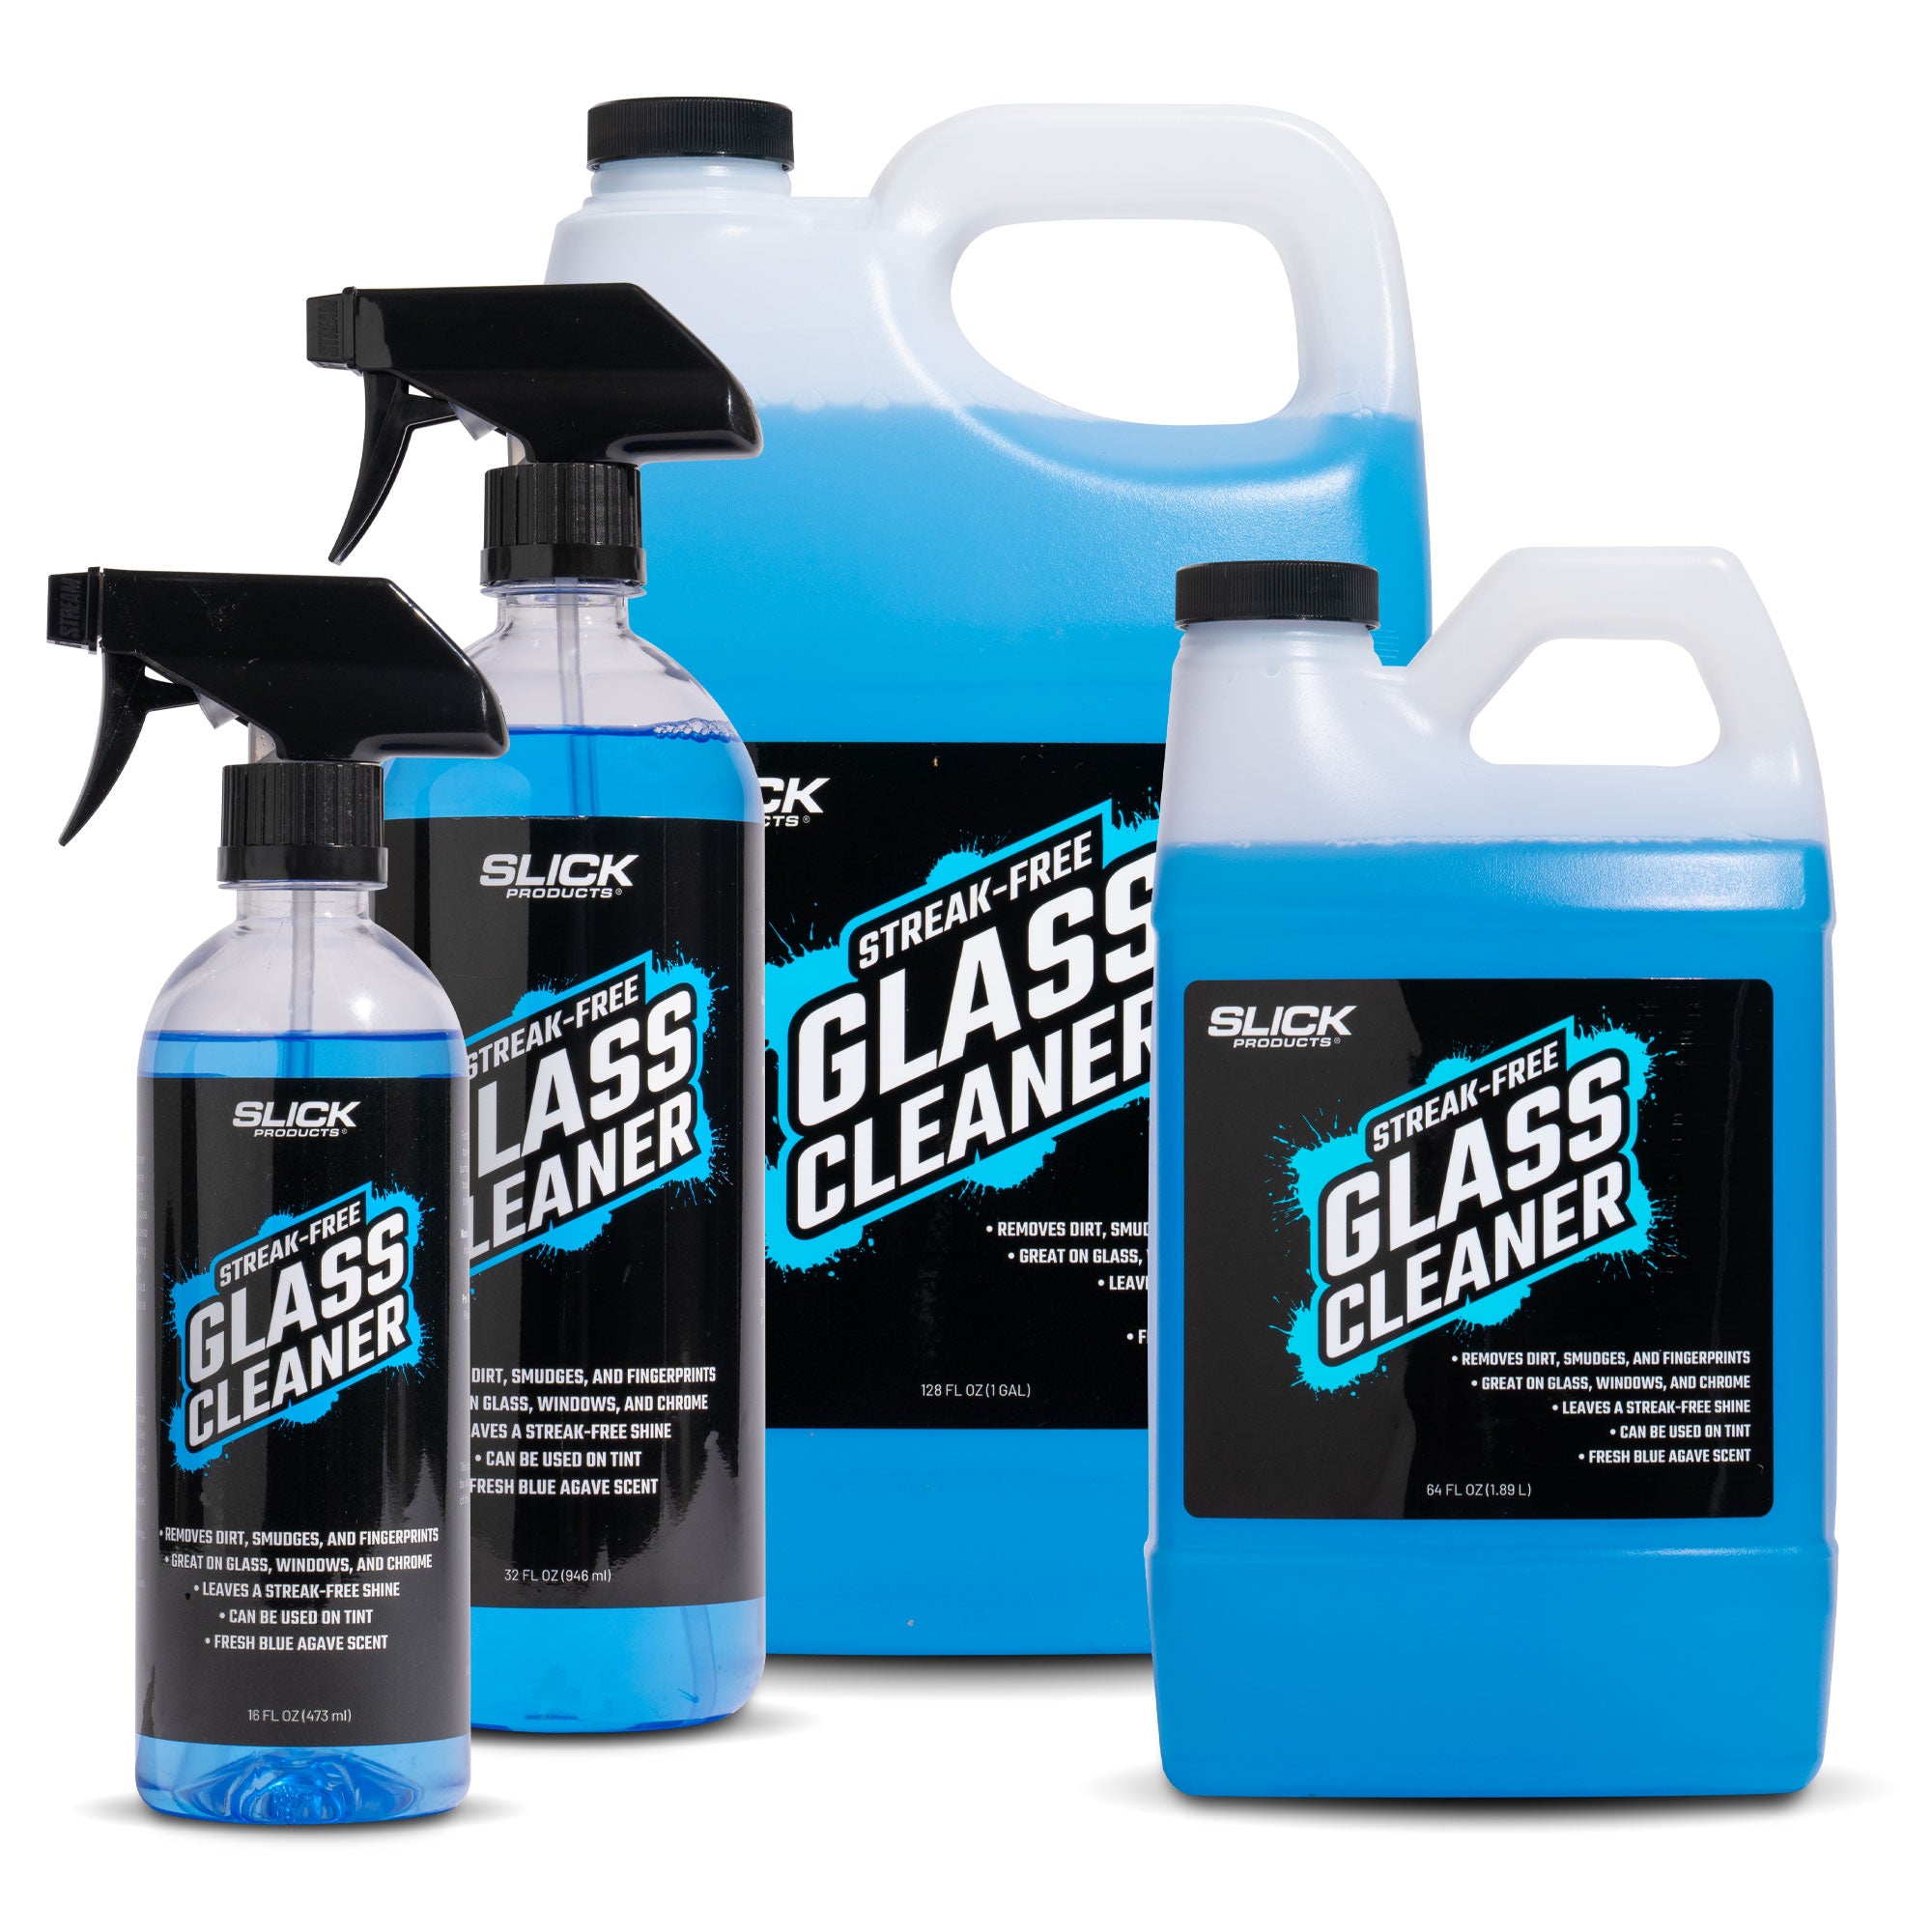 REV Auto Car Window Cleaning Kit - Includes 32oz Car Window Cleaner and 3  Window Drying Towels | Ammonia Free Glass Cleaner That is Tint Safe | Auto